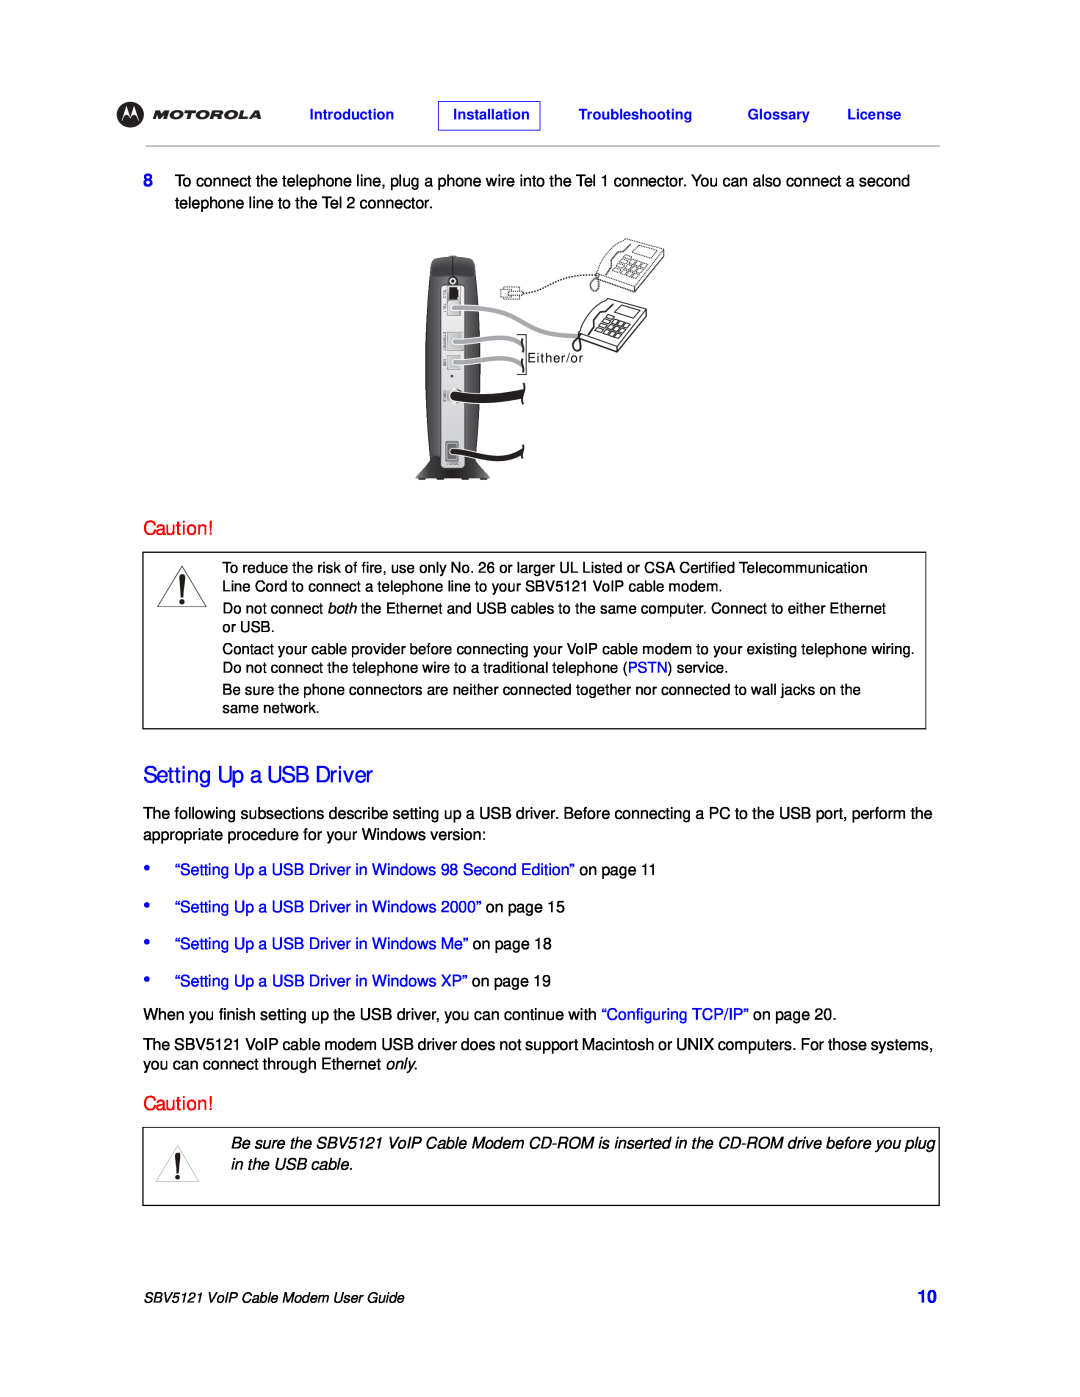 Nikon SBV5121 manual “Setting Up a USB Driver in Windows 98 Second Edition” on page 